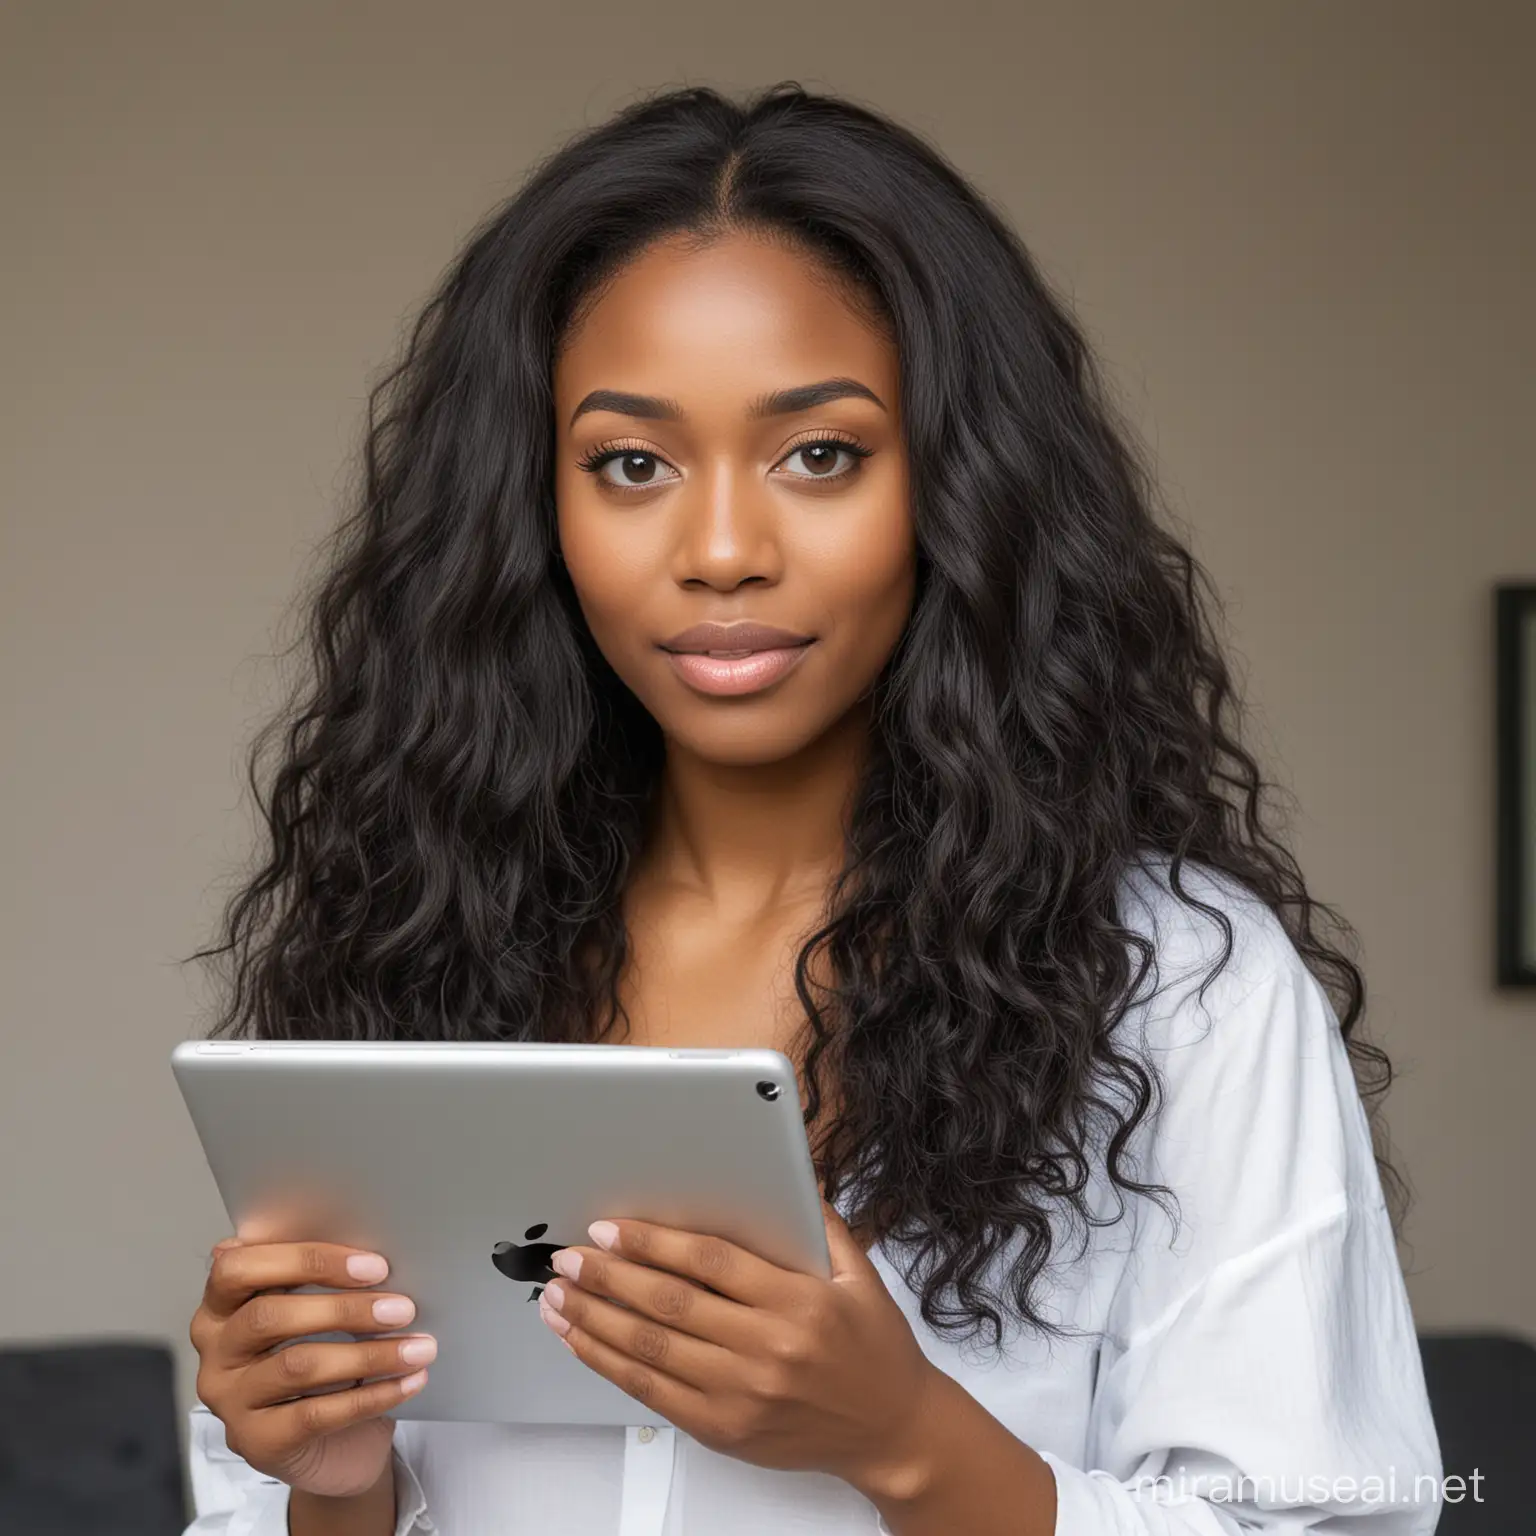 A black woman with long hair holding the iPad